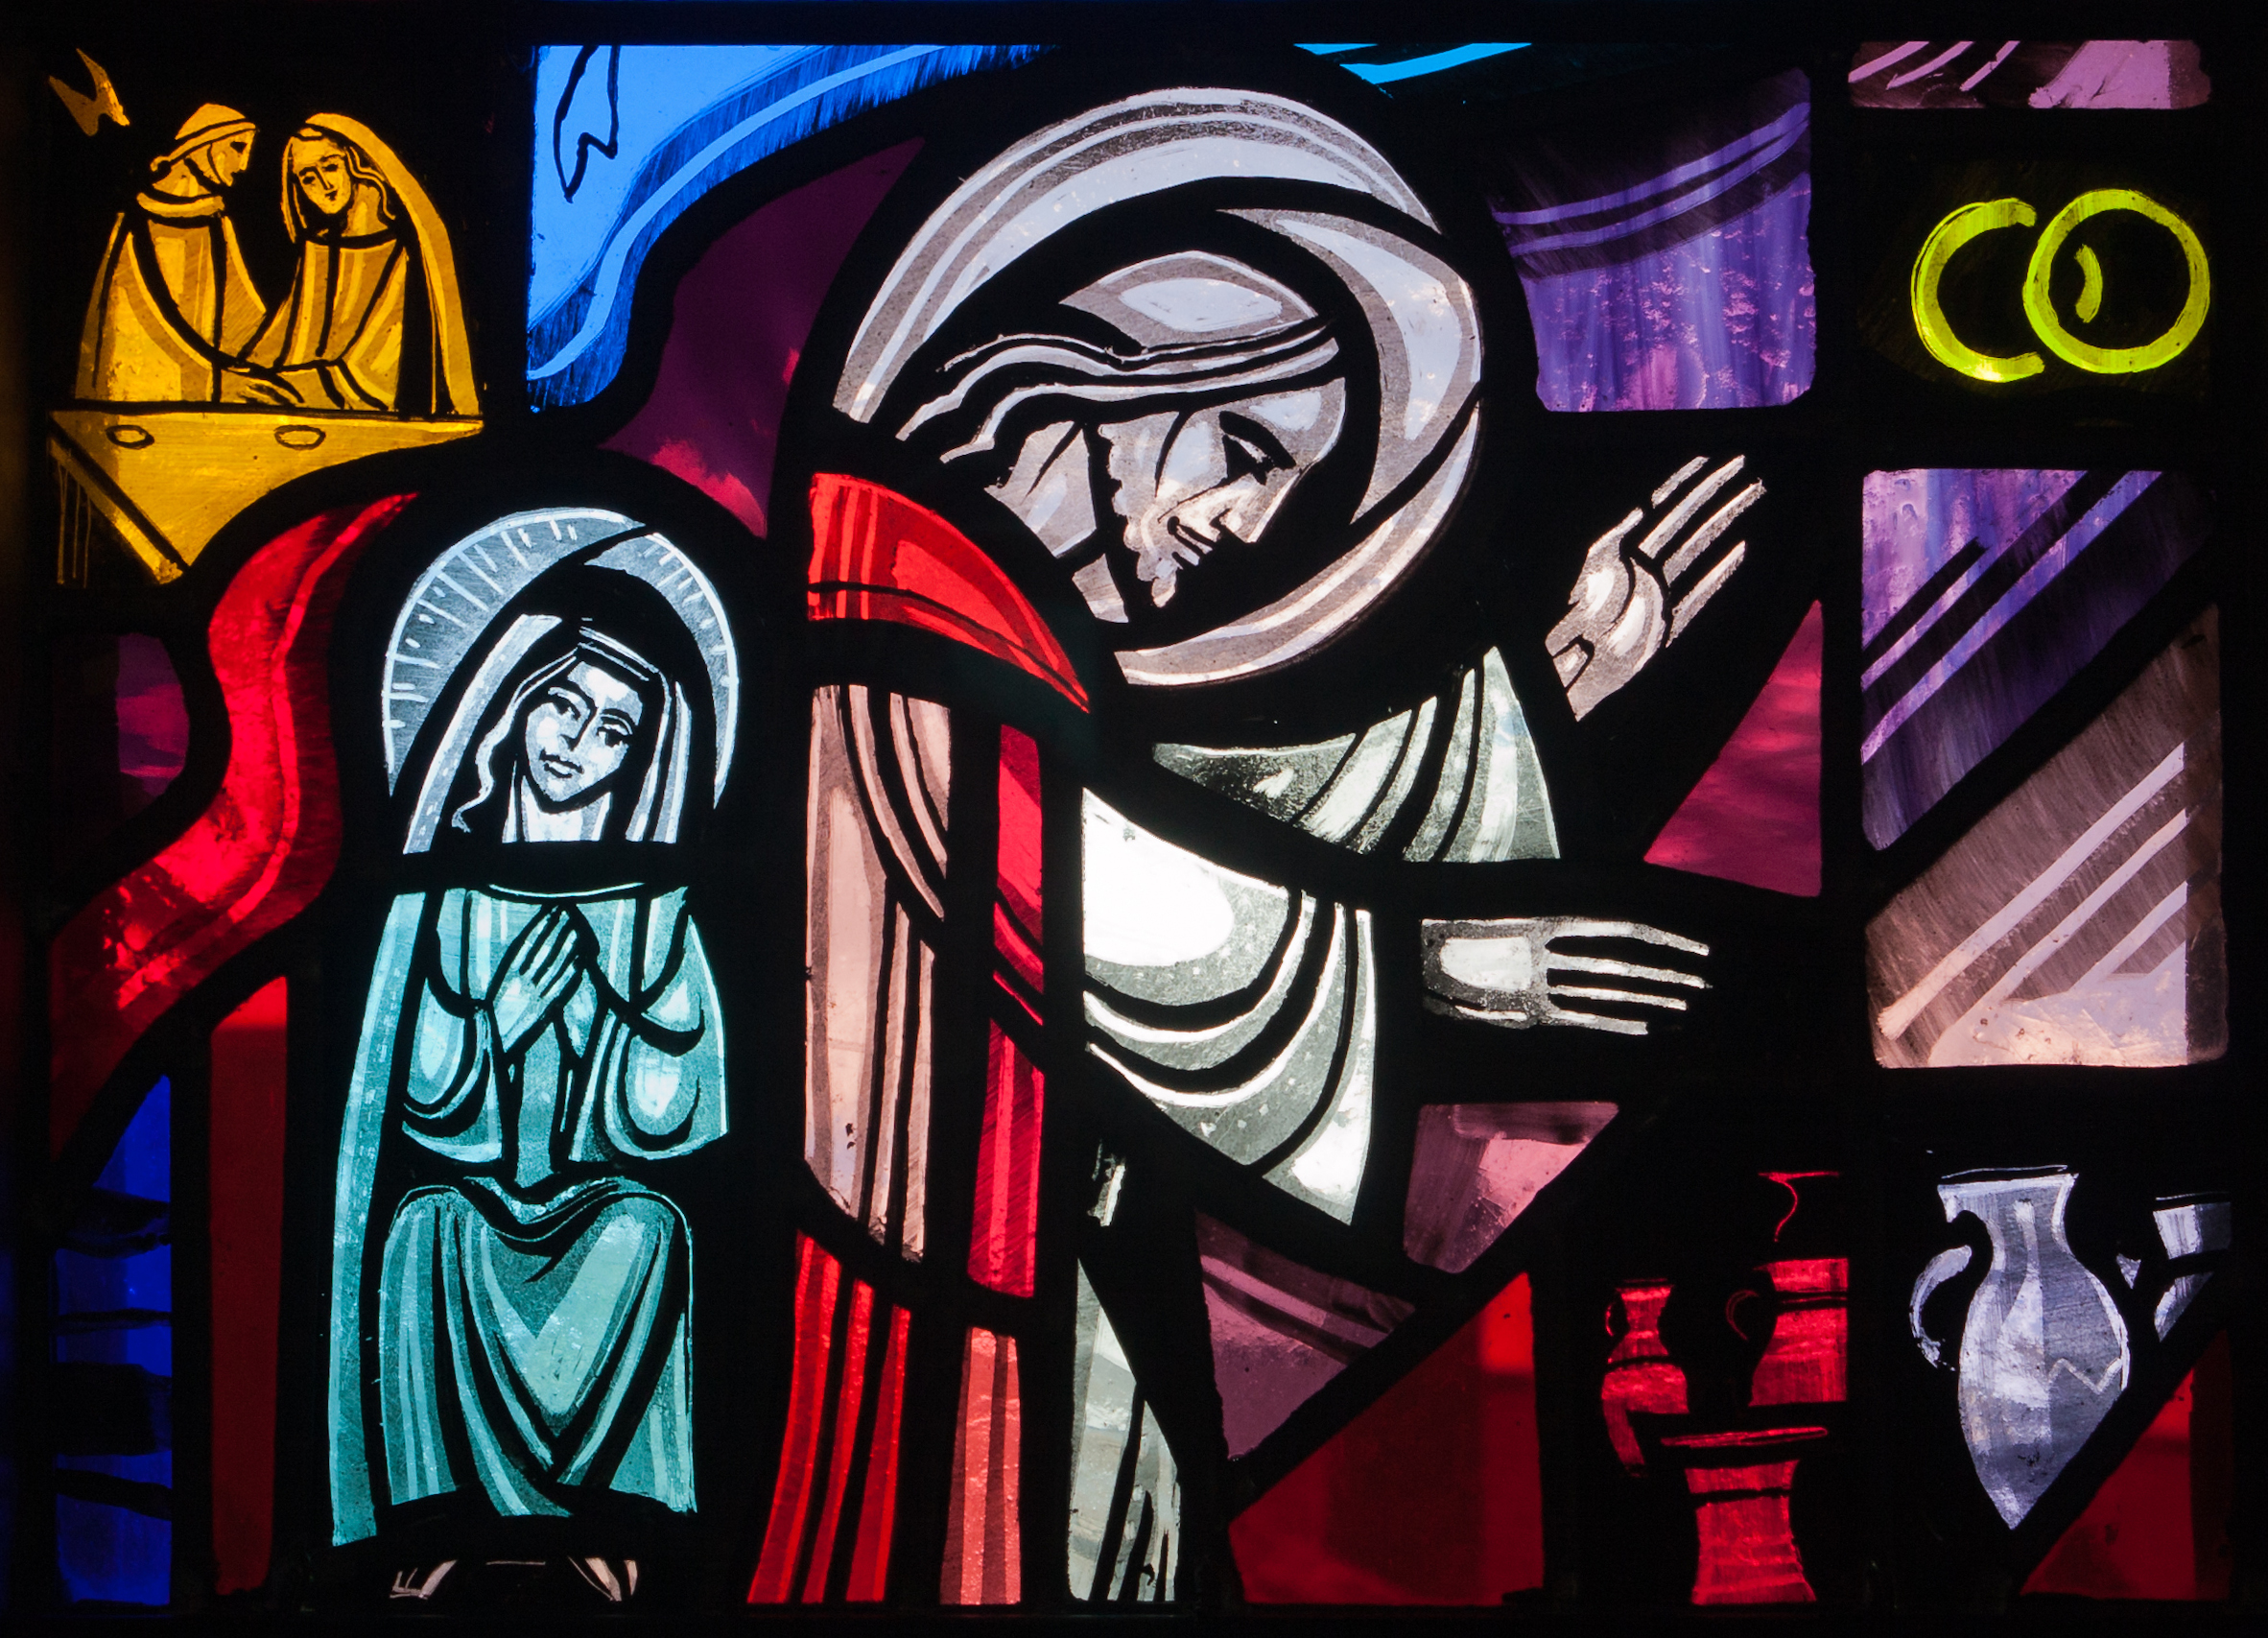 Tullow Church of the Most Holy Rosary South Transept Window Mysteries of Light and Pope John Paul II Detail Wedding Feast of Cana 2013 09 06